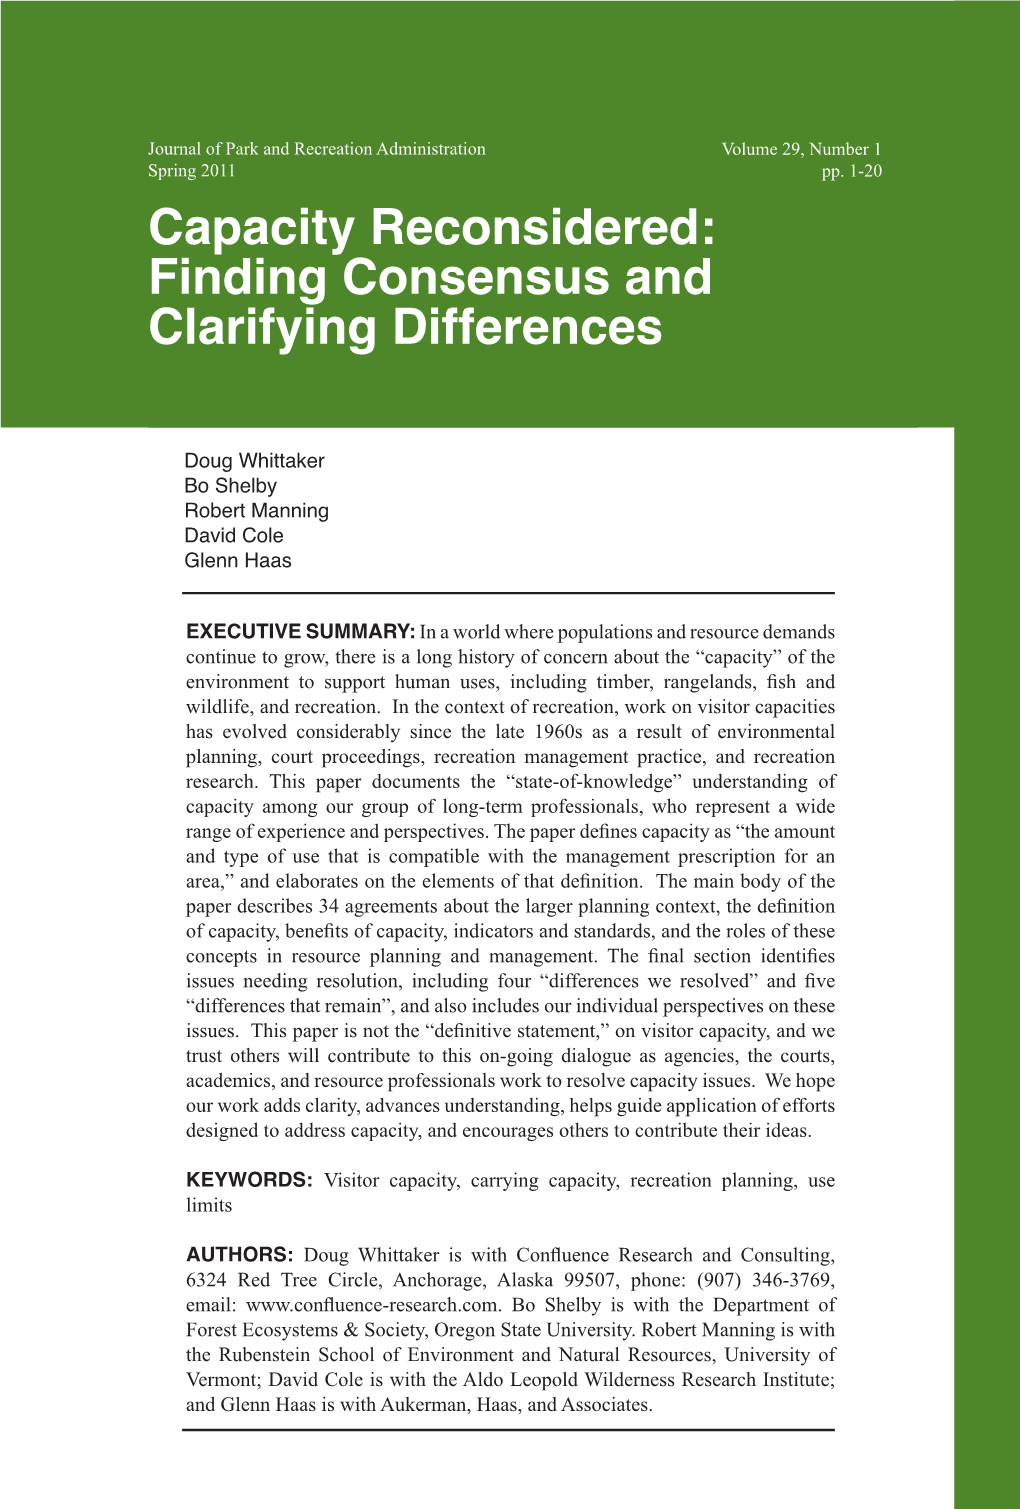 Capacity Reconsidered: Finding Consensus and Clarifying Differences